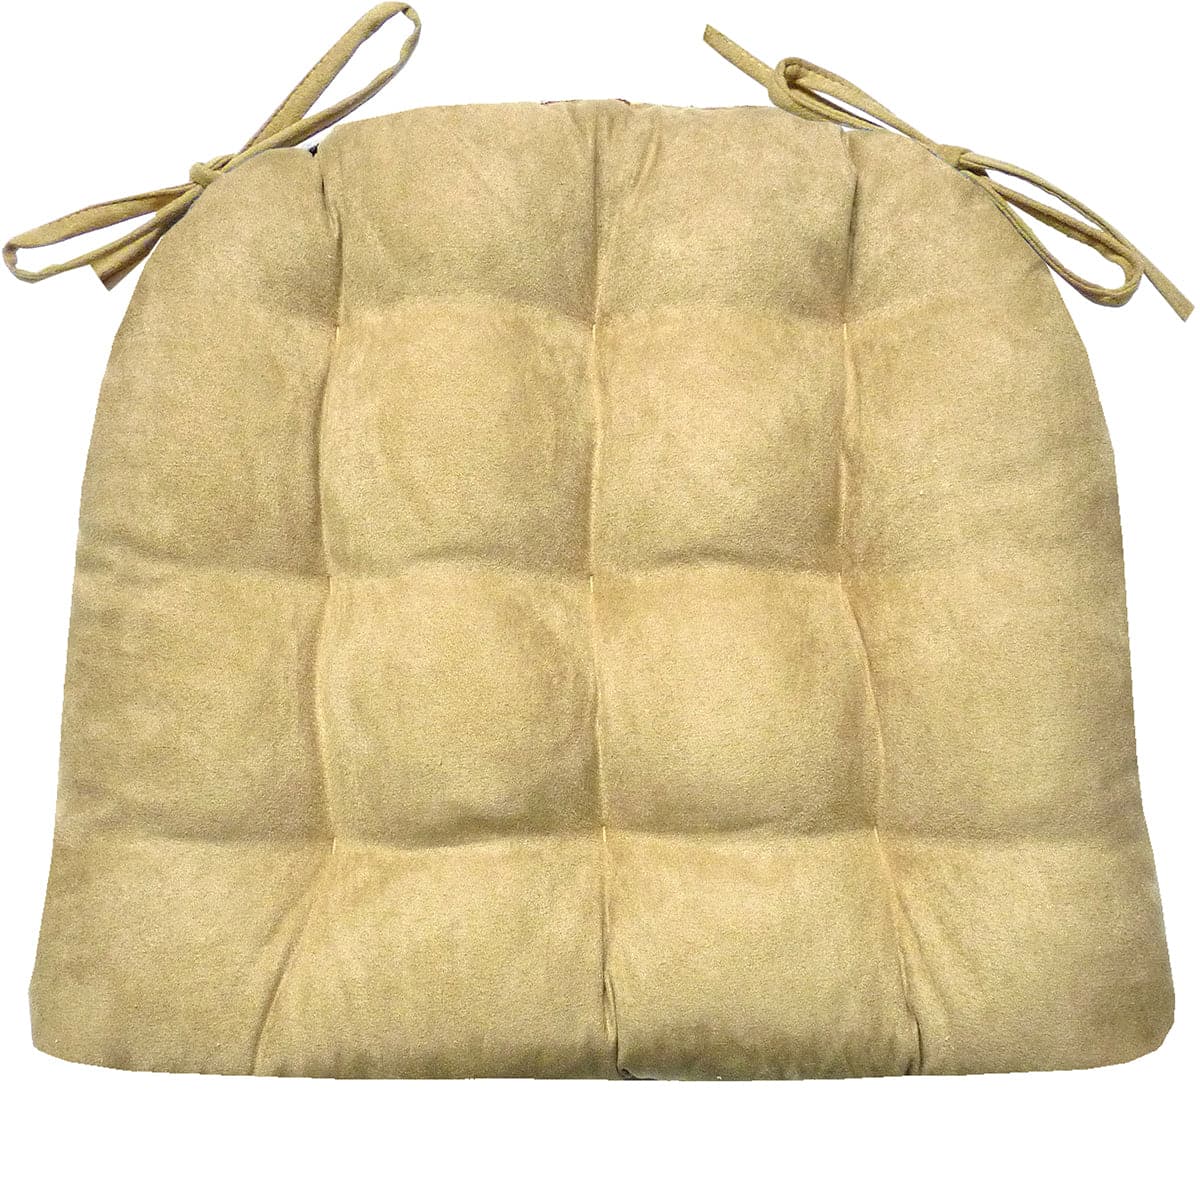 Southwest Sedona Chair Cushion Reverse to Microsuede Camel